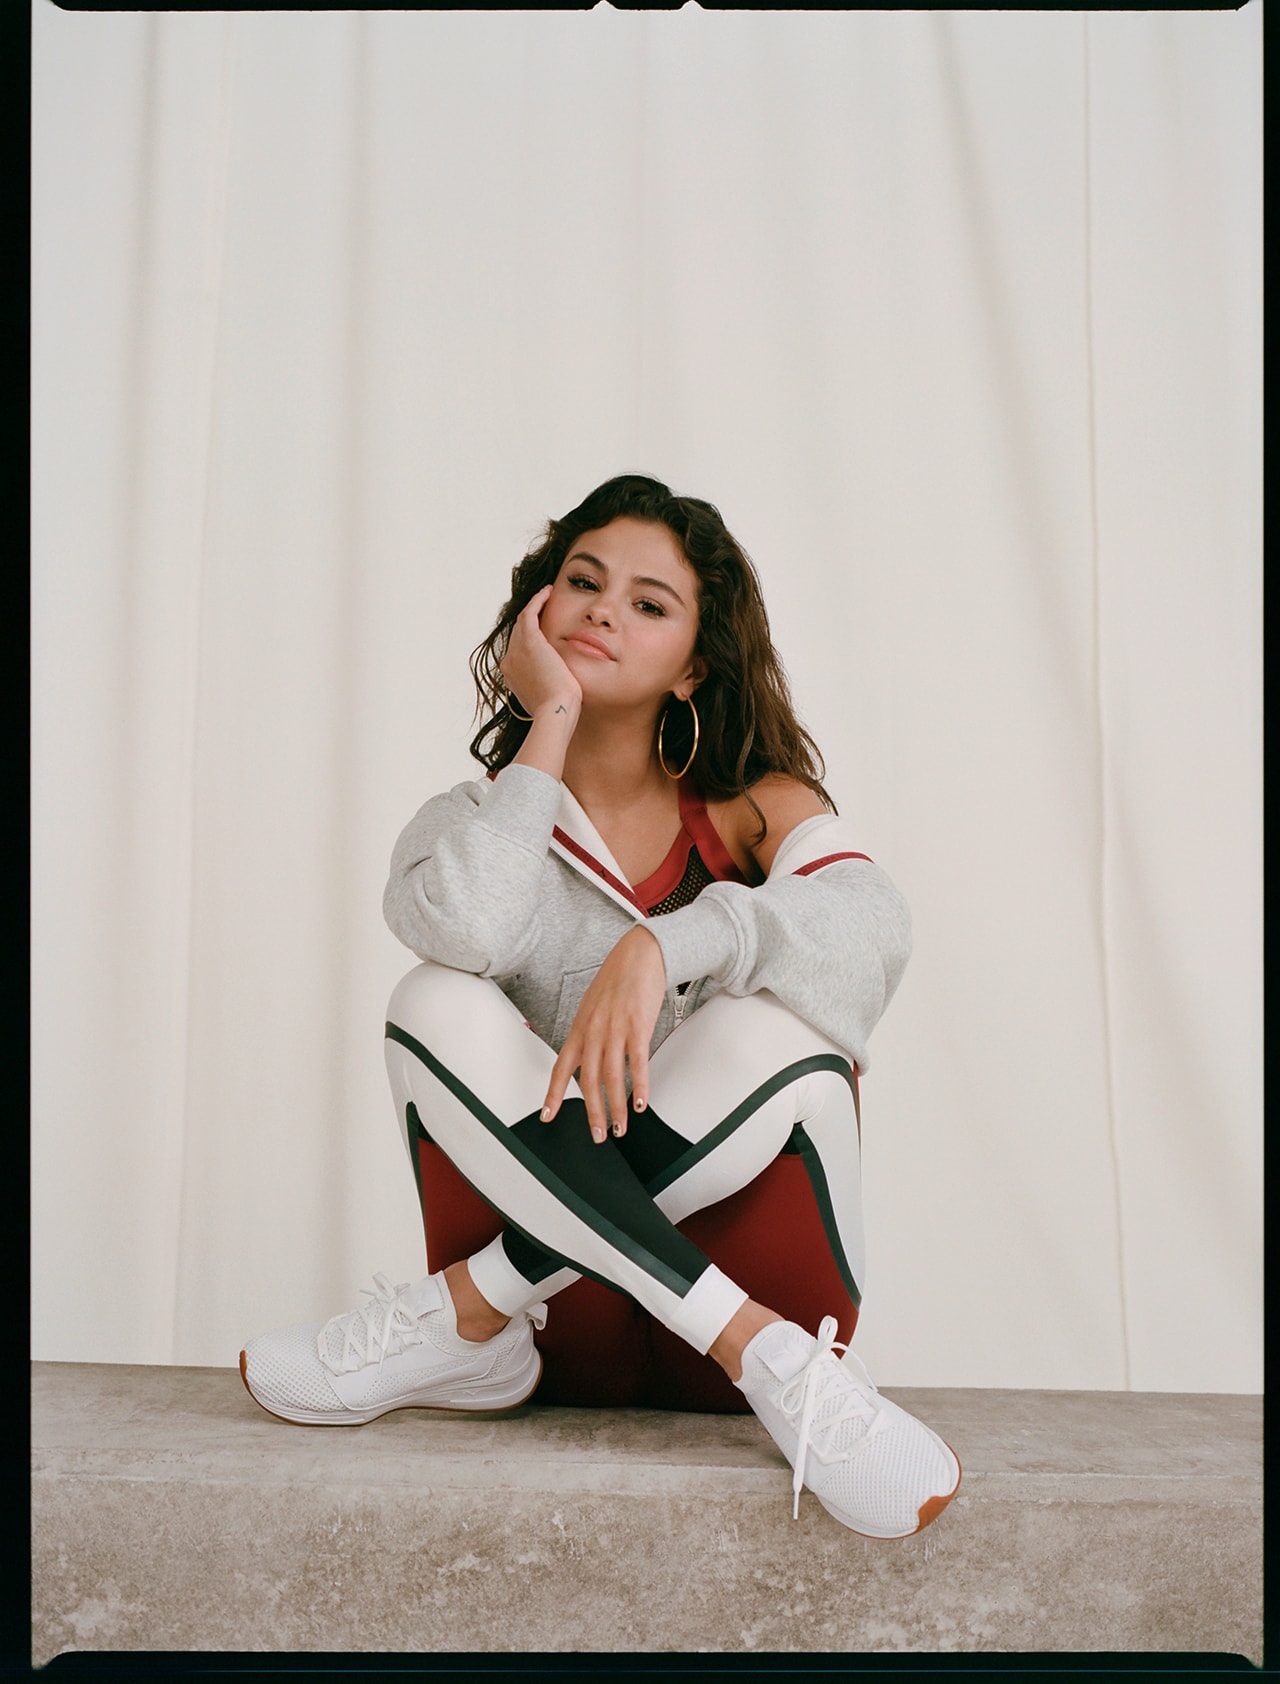 Selena Gomez PUMA Strong Girl Collaboration Campaign SG Runner Sneakers Sportswear Activewear Sports Defy Mid